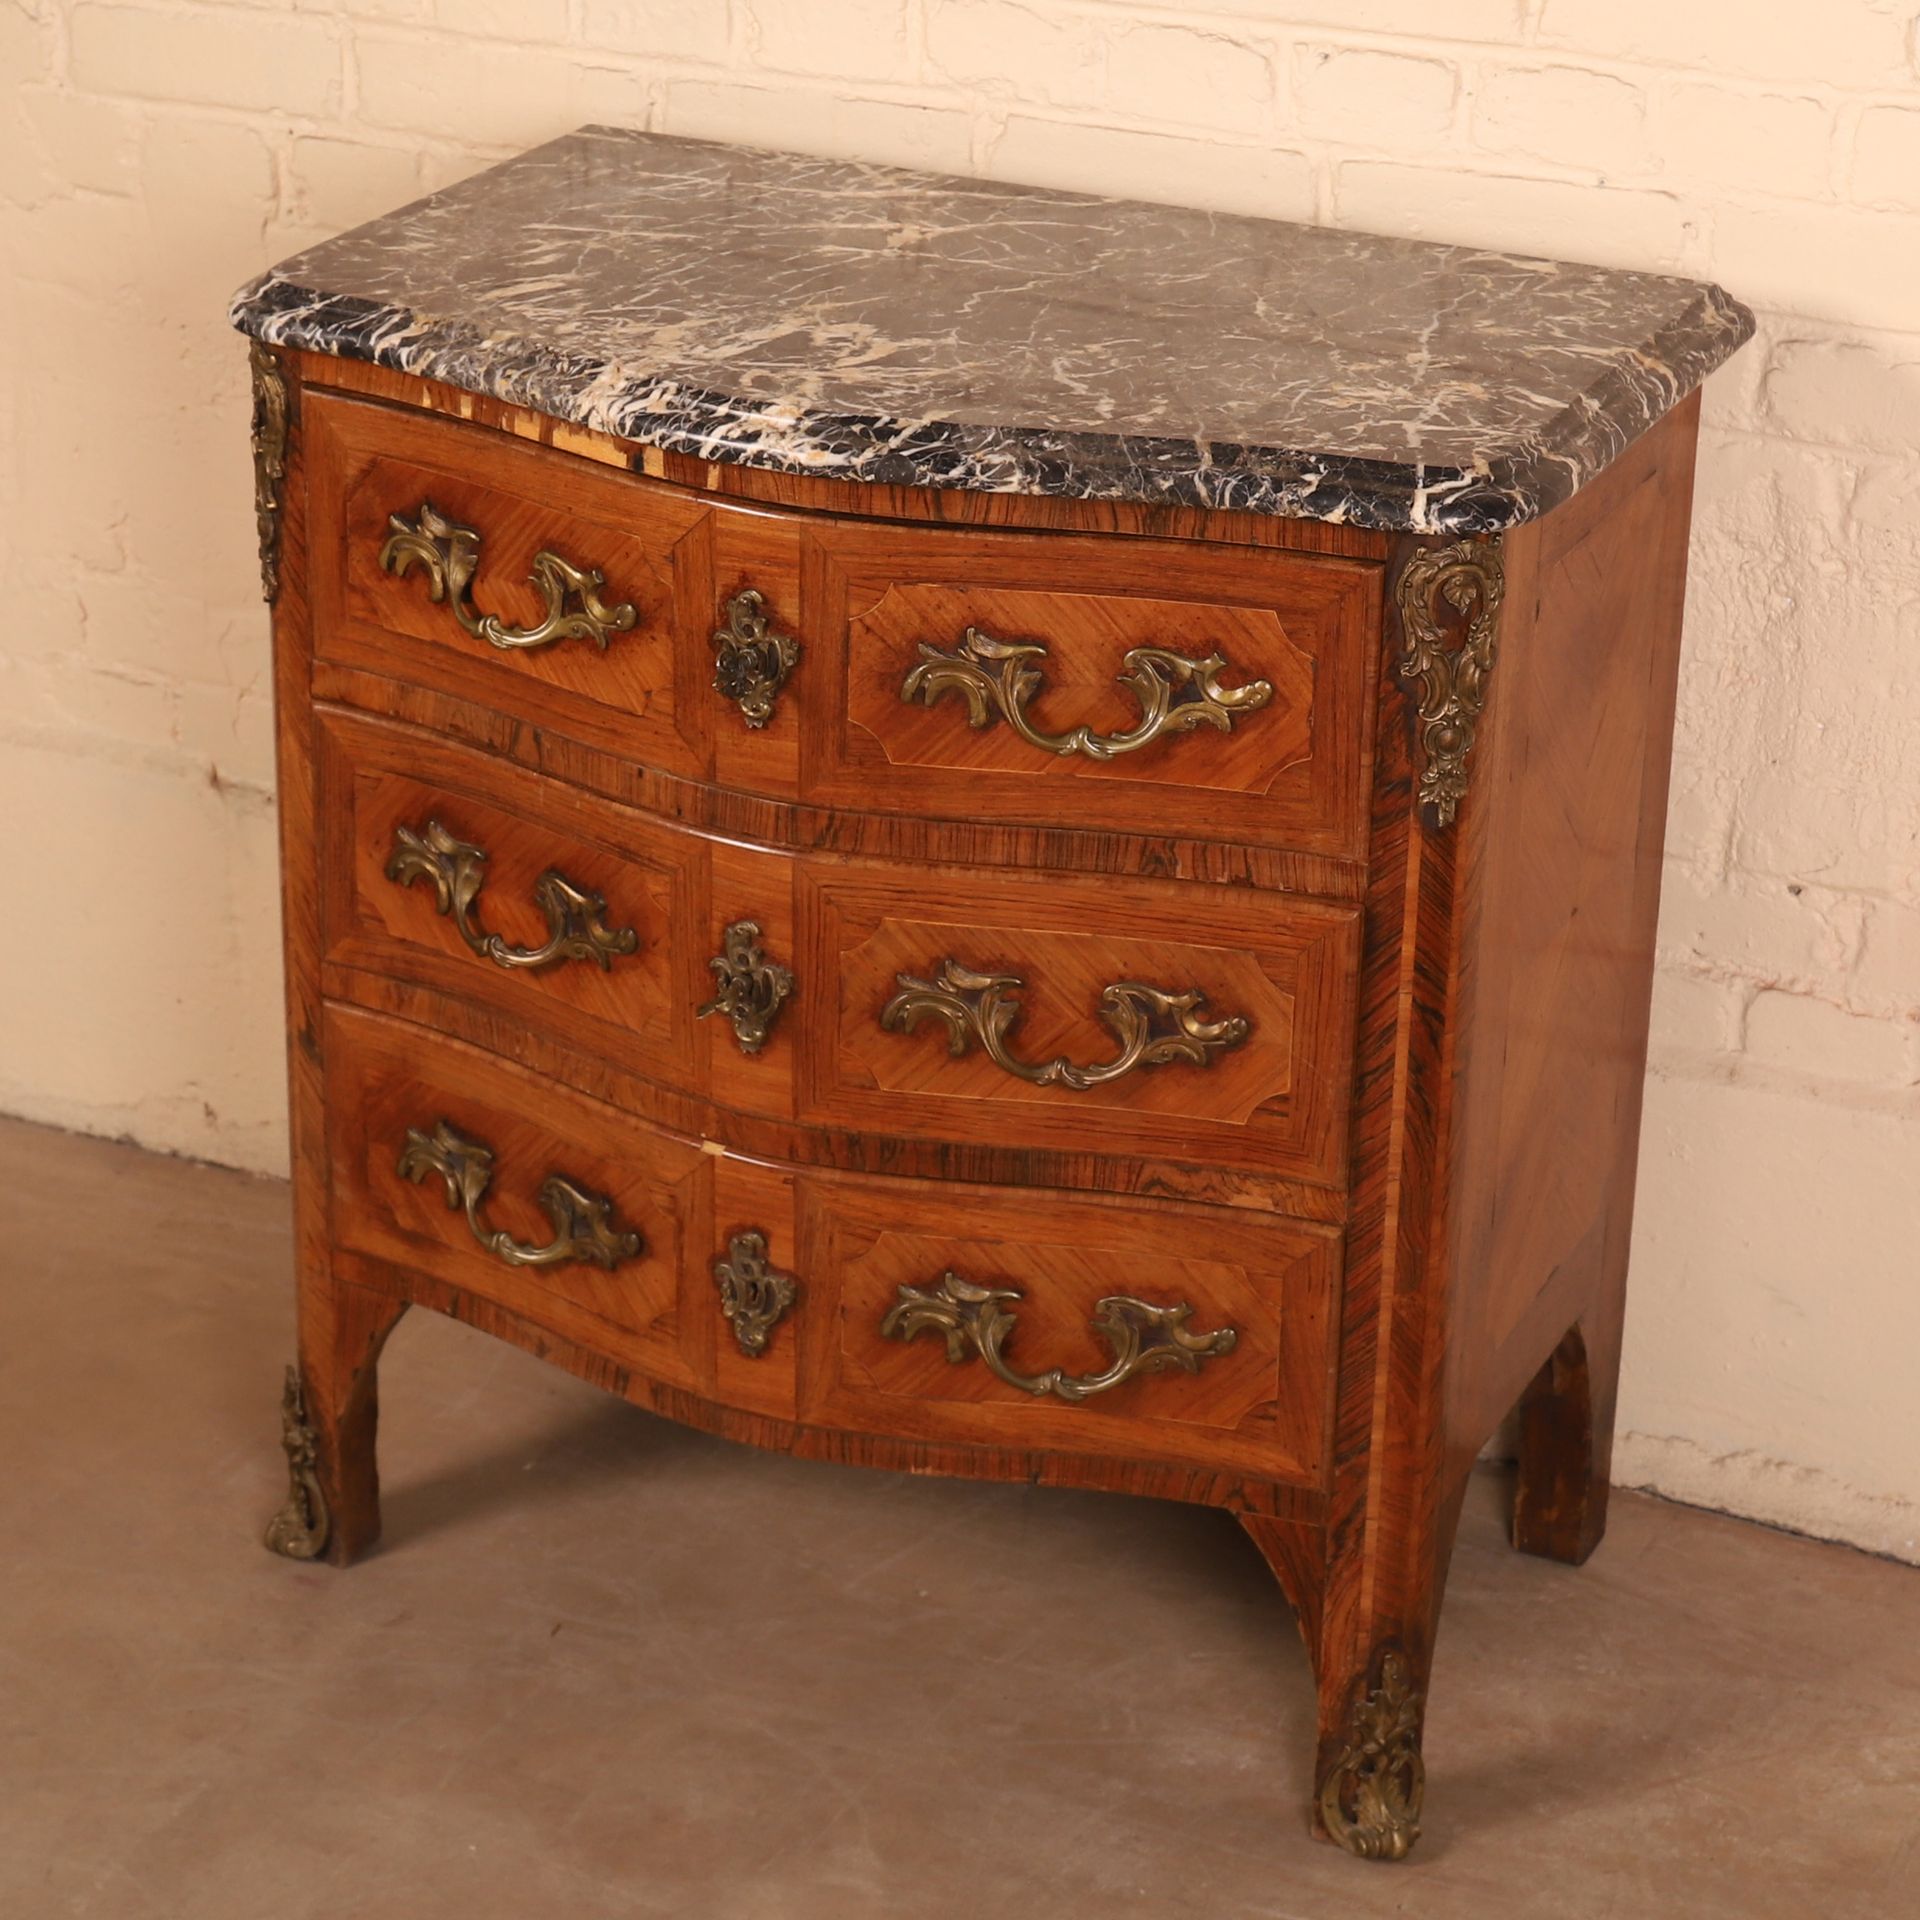 Null SMALL REGENCY COMMODE with three drawers

Bronze trim

Black marble top wit&hellip;